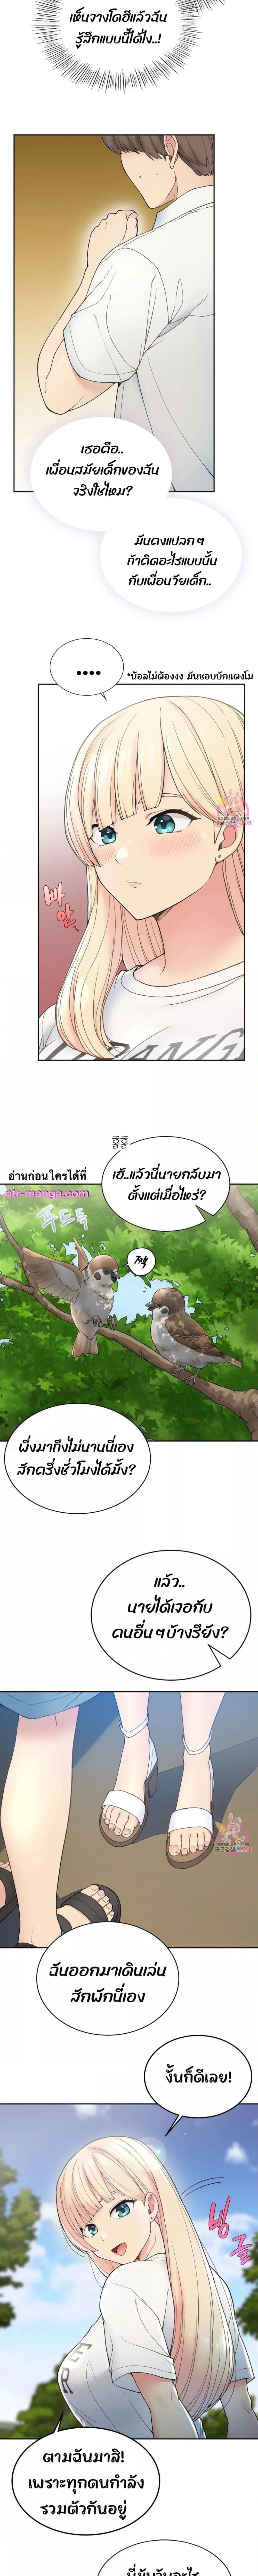 Shall We Live Together in the Country ตอนที่ 1 ภาพ 17